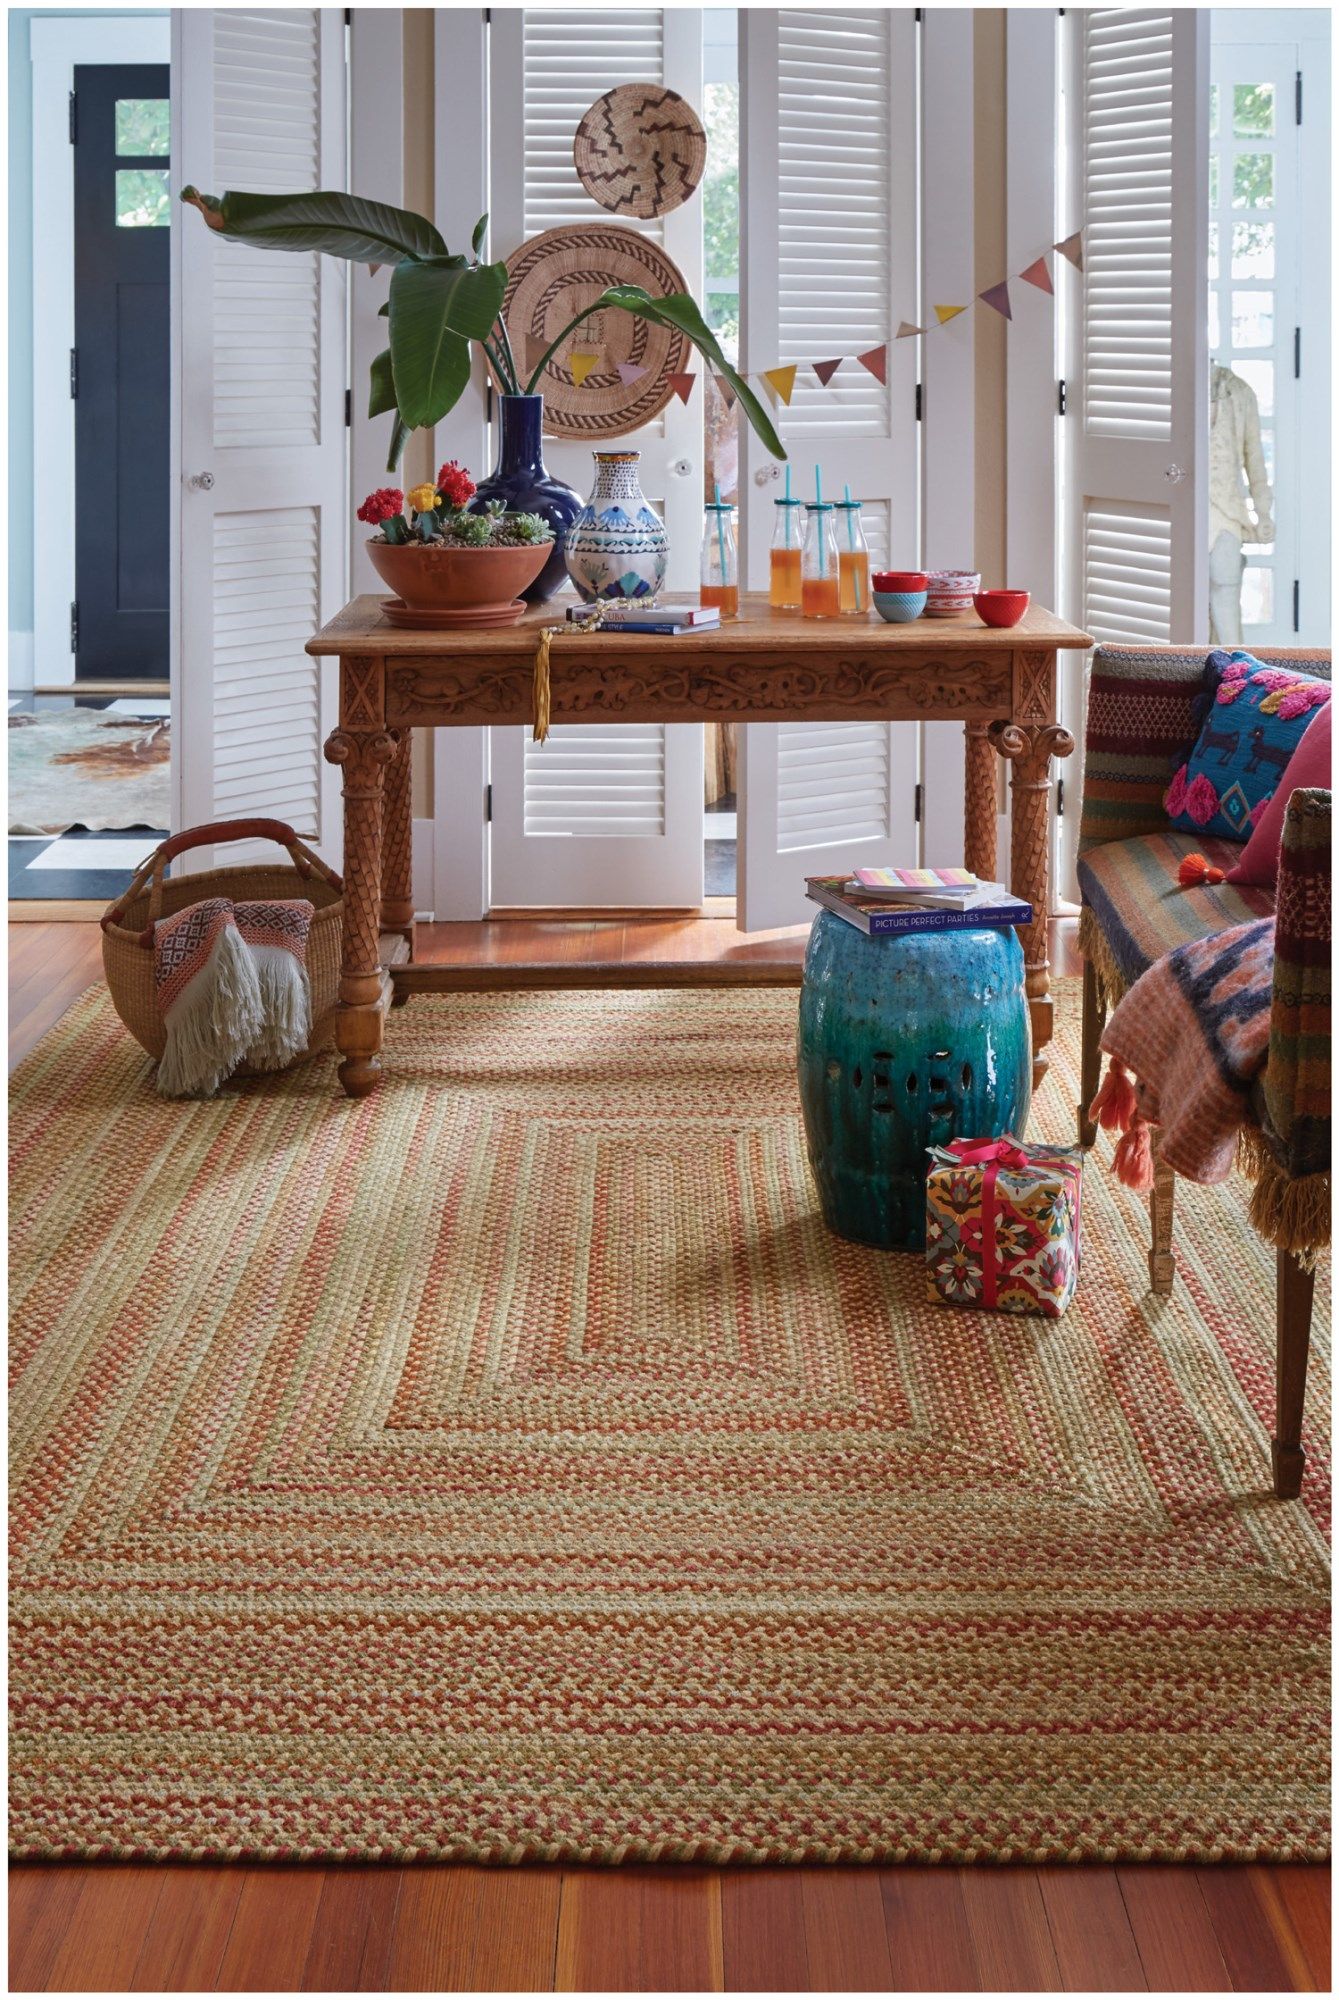 Capel Manchester Braided Rugs | Braided Wool Rugs | Rugs Direct Regarding Hand Braided Rugs (View 10 of 15)